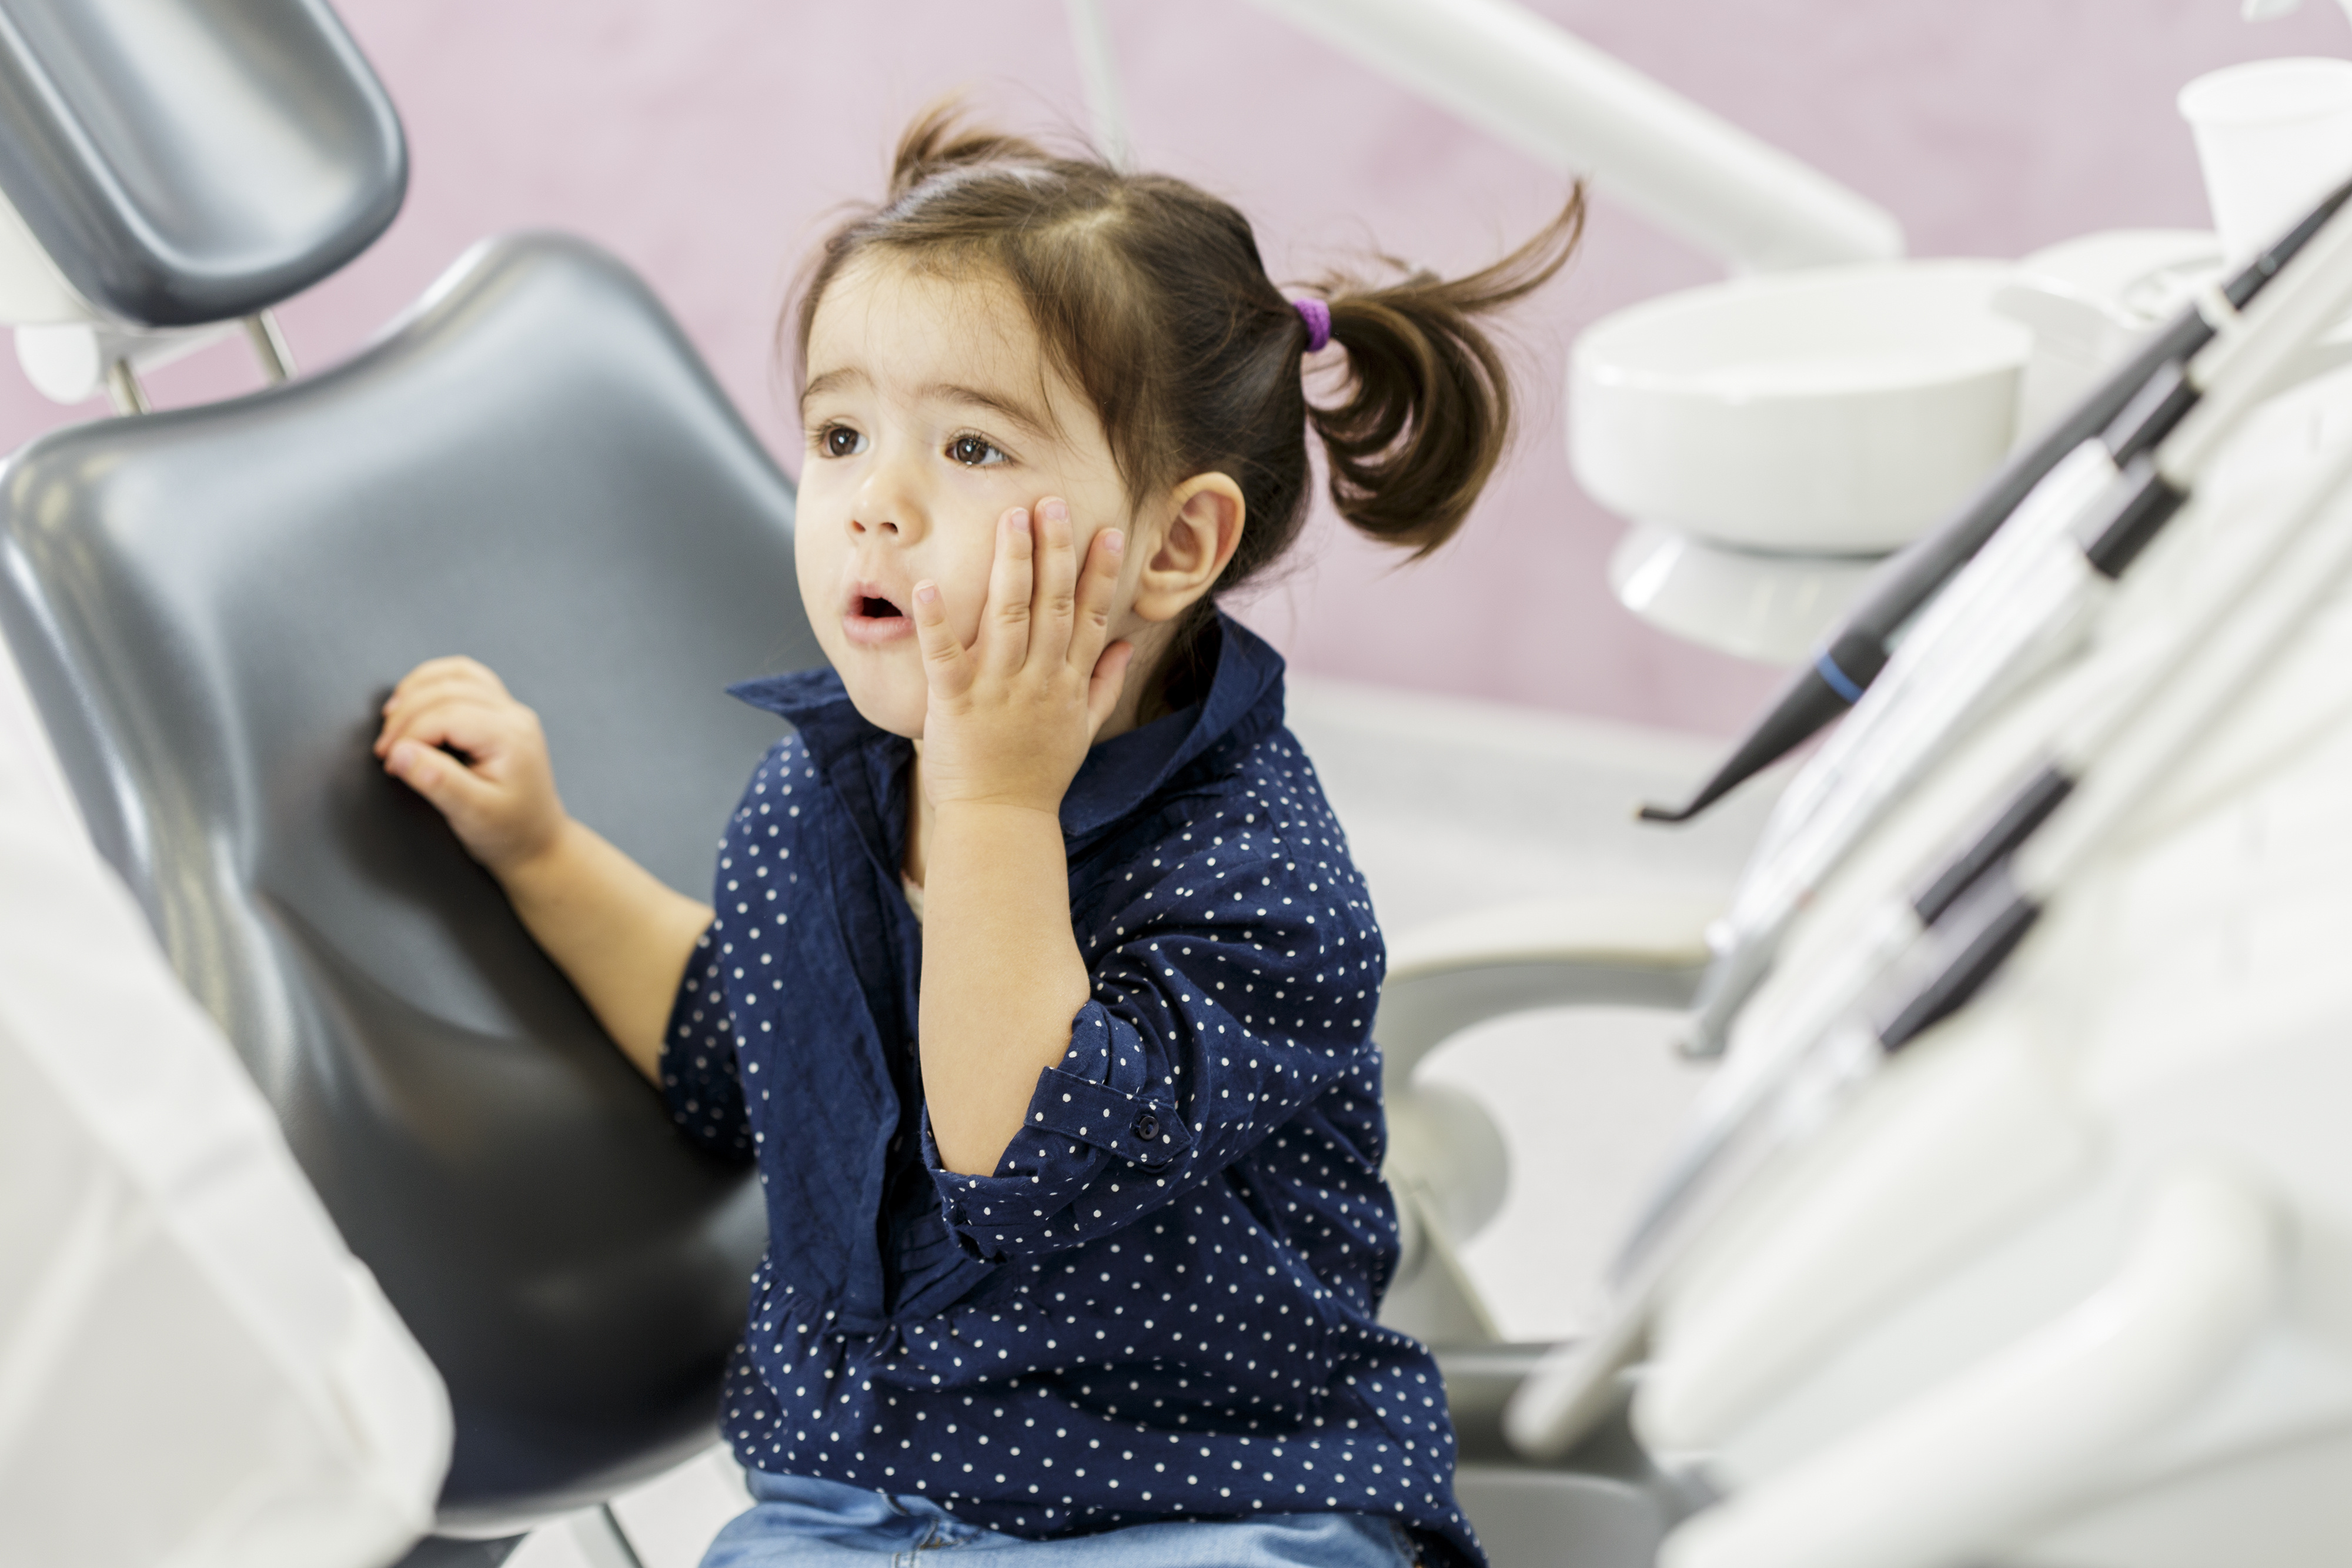 The Best Pediatric Dental Services in Auburn, WA, Provide You with the Peace of Mind You Deserve